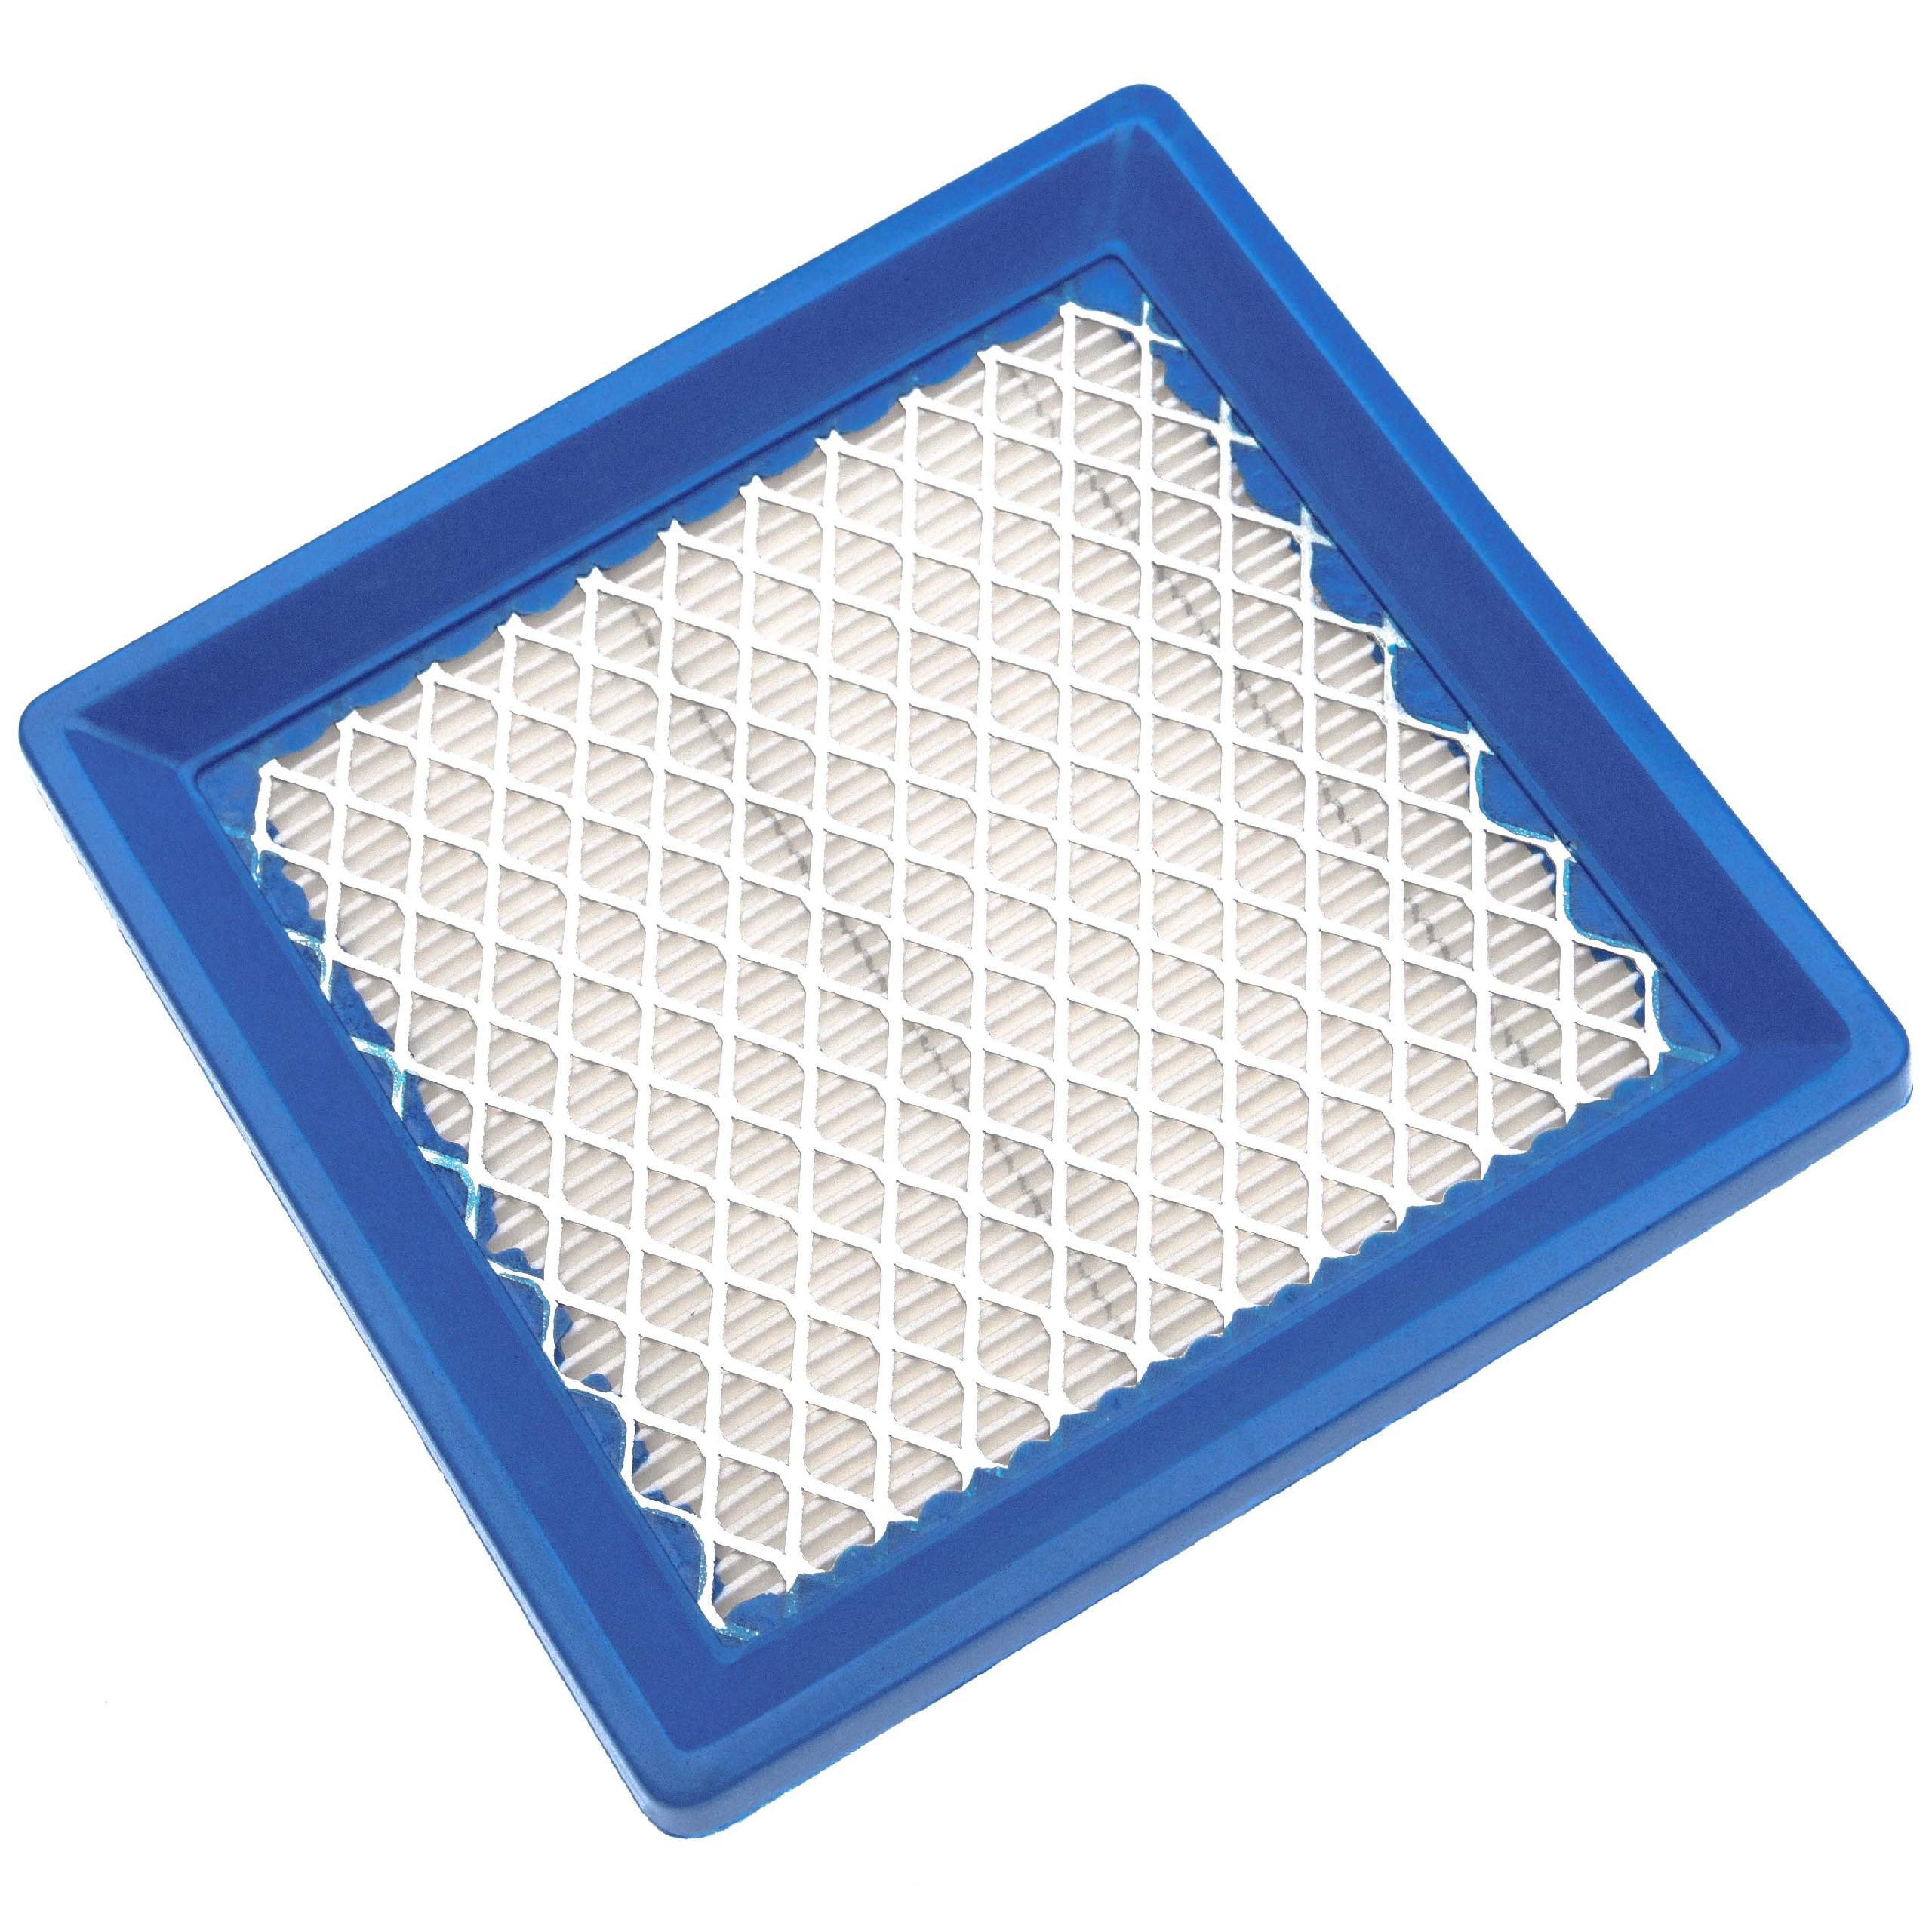 vhbw Replacement Air Filter Replacement for Briggs & Stratton 399877, 399877S for Motor